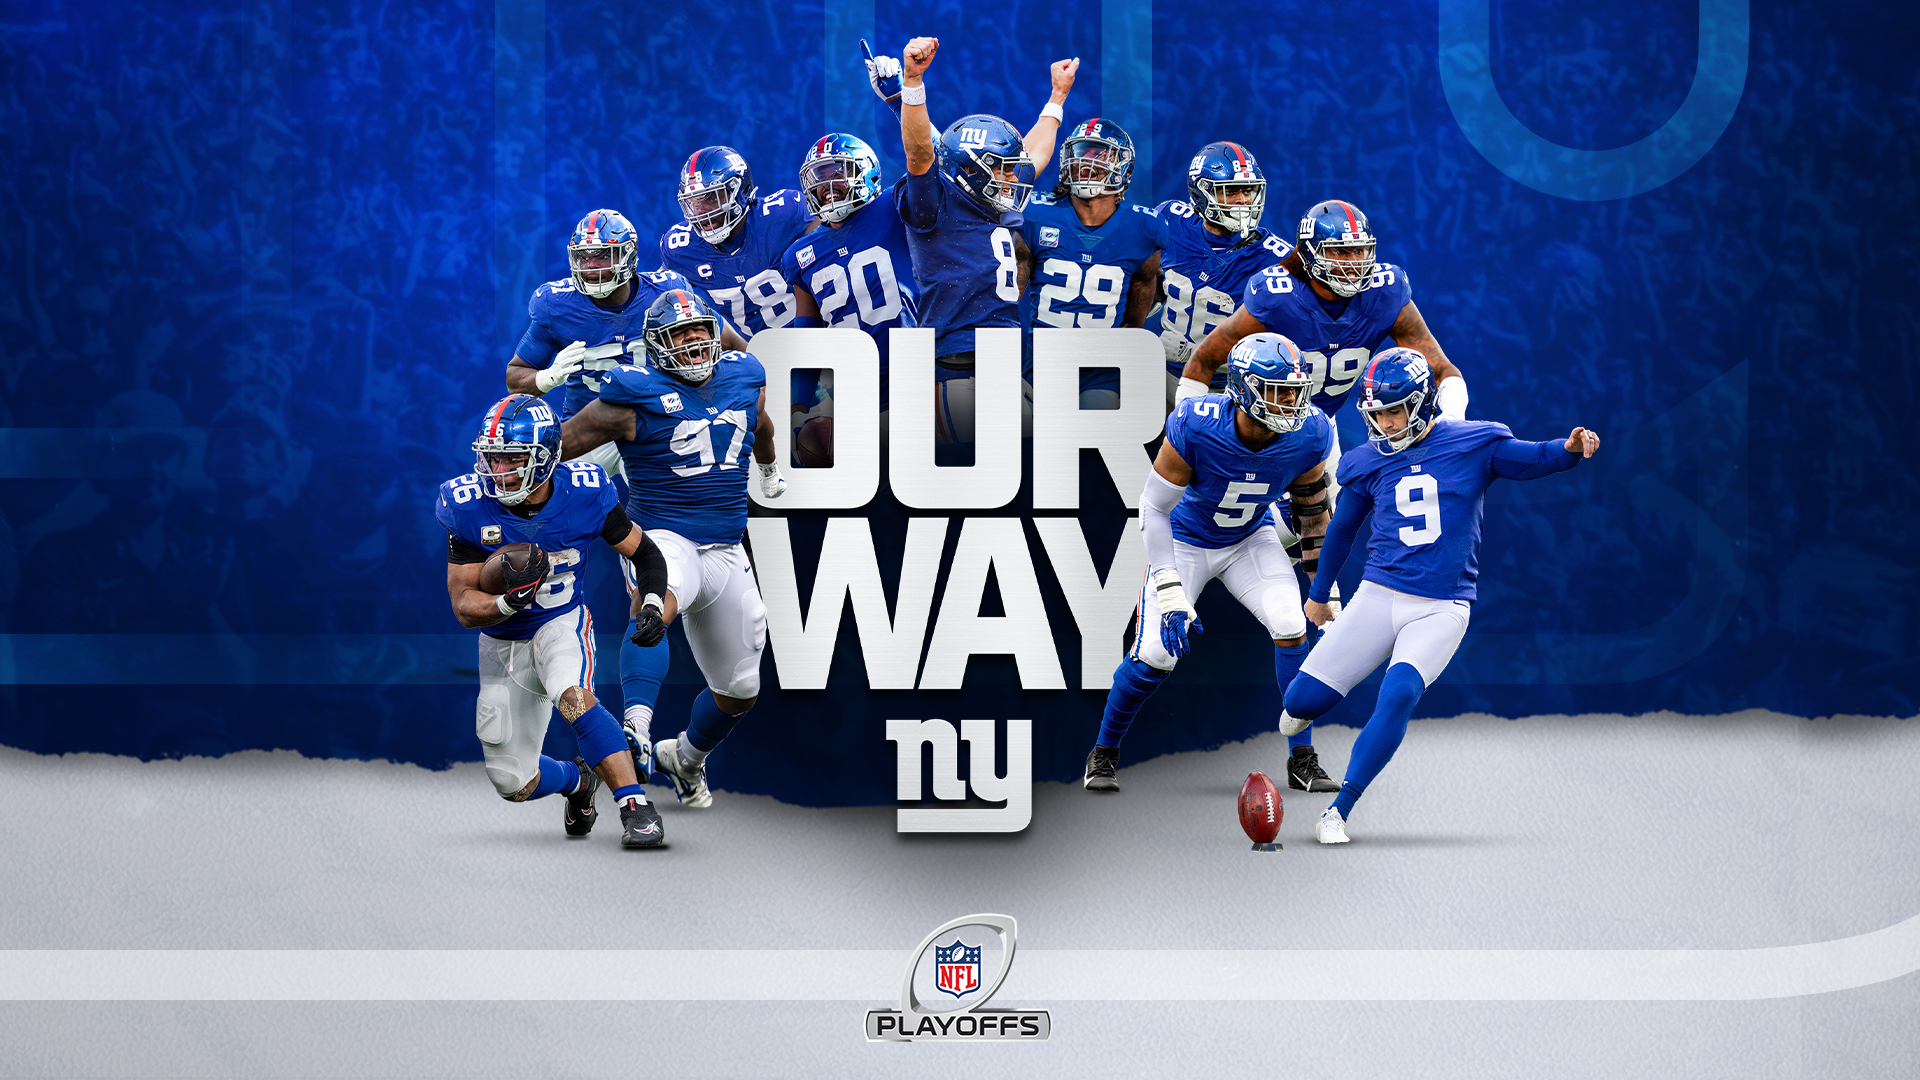 New York Giants on X: 'We've launched “OUR WAY” playoff campaign